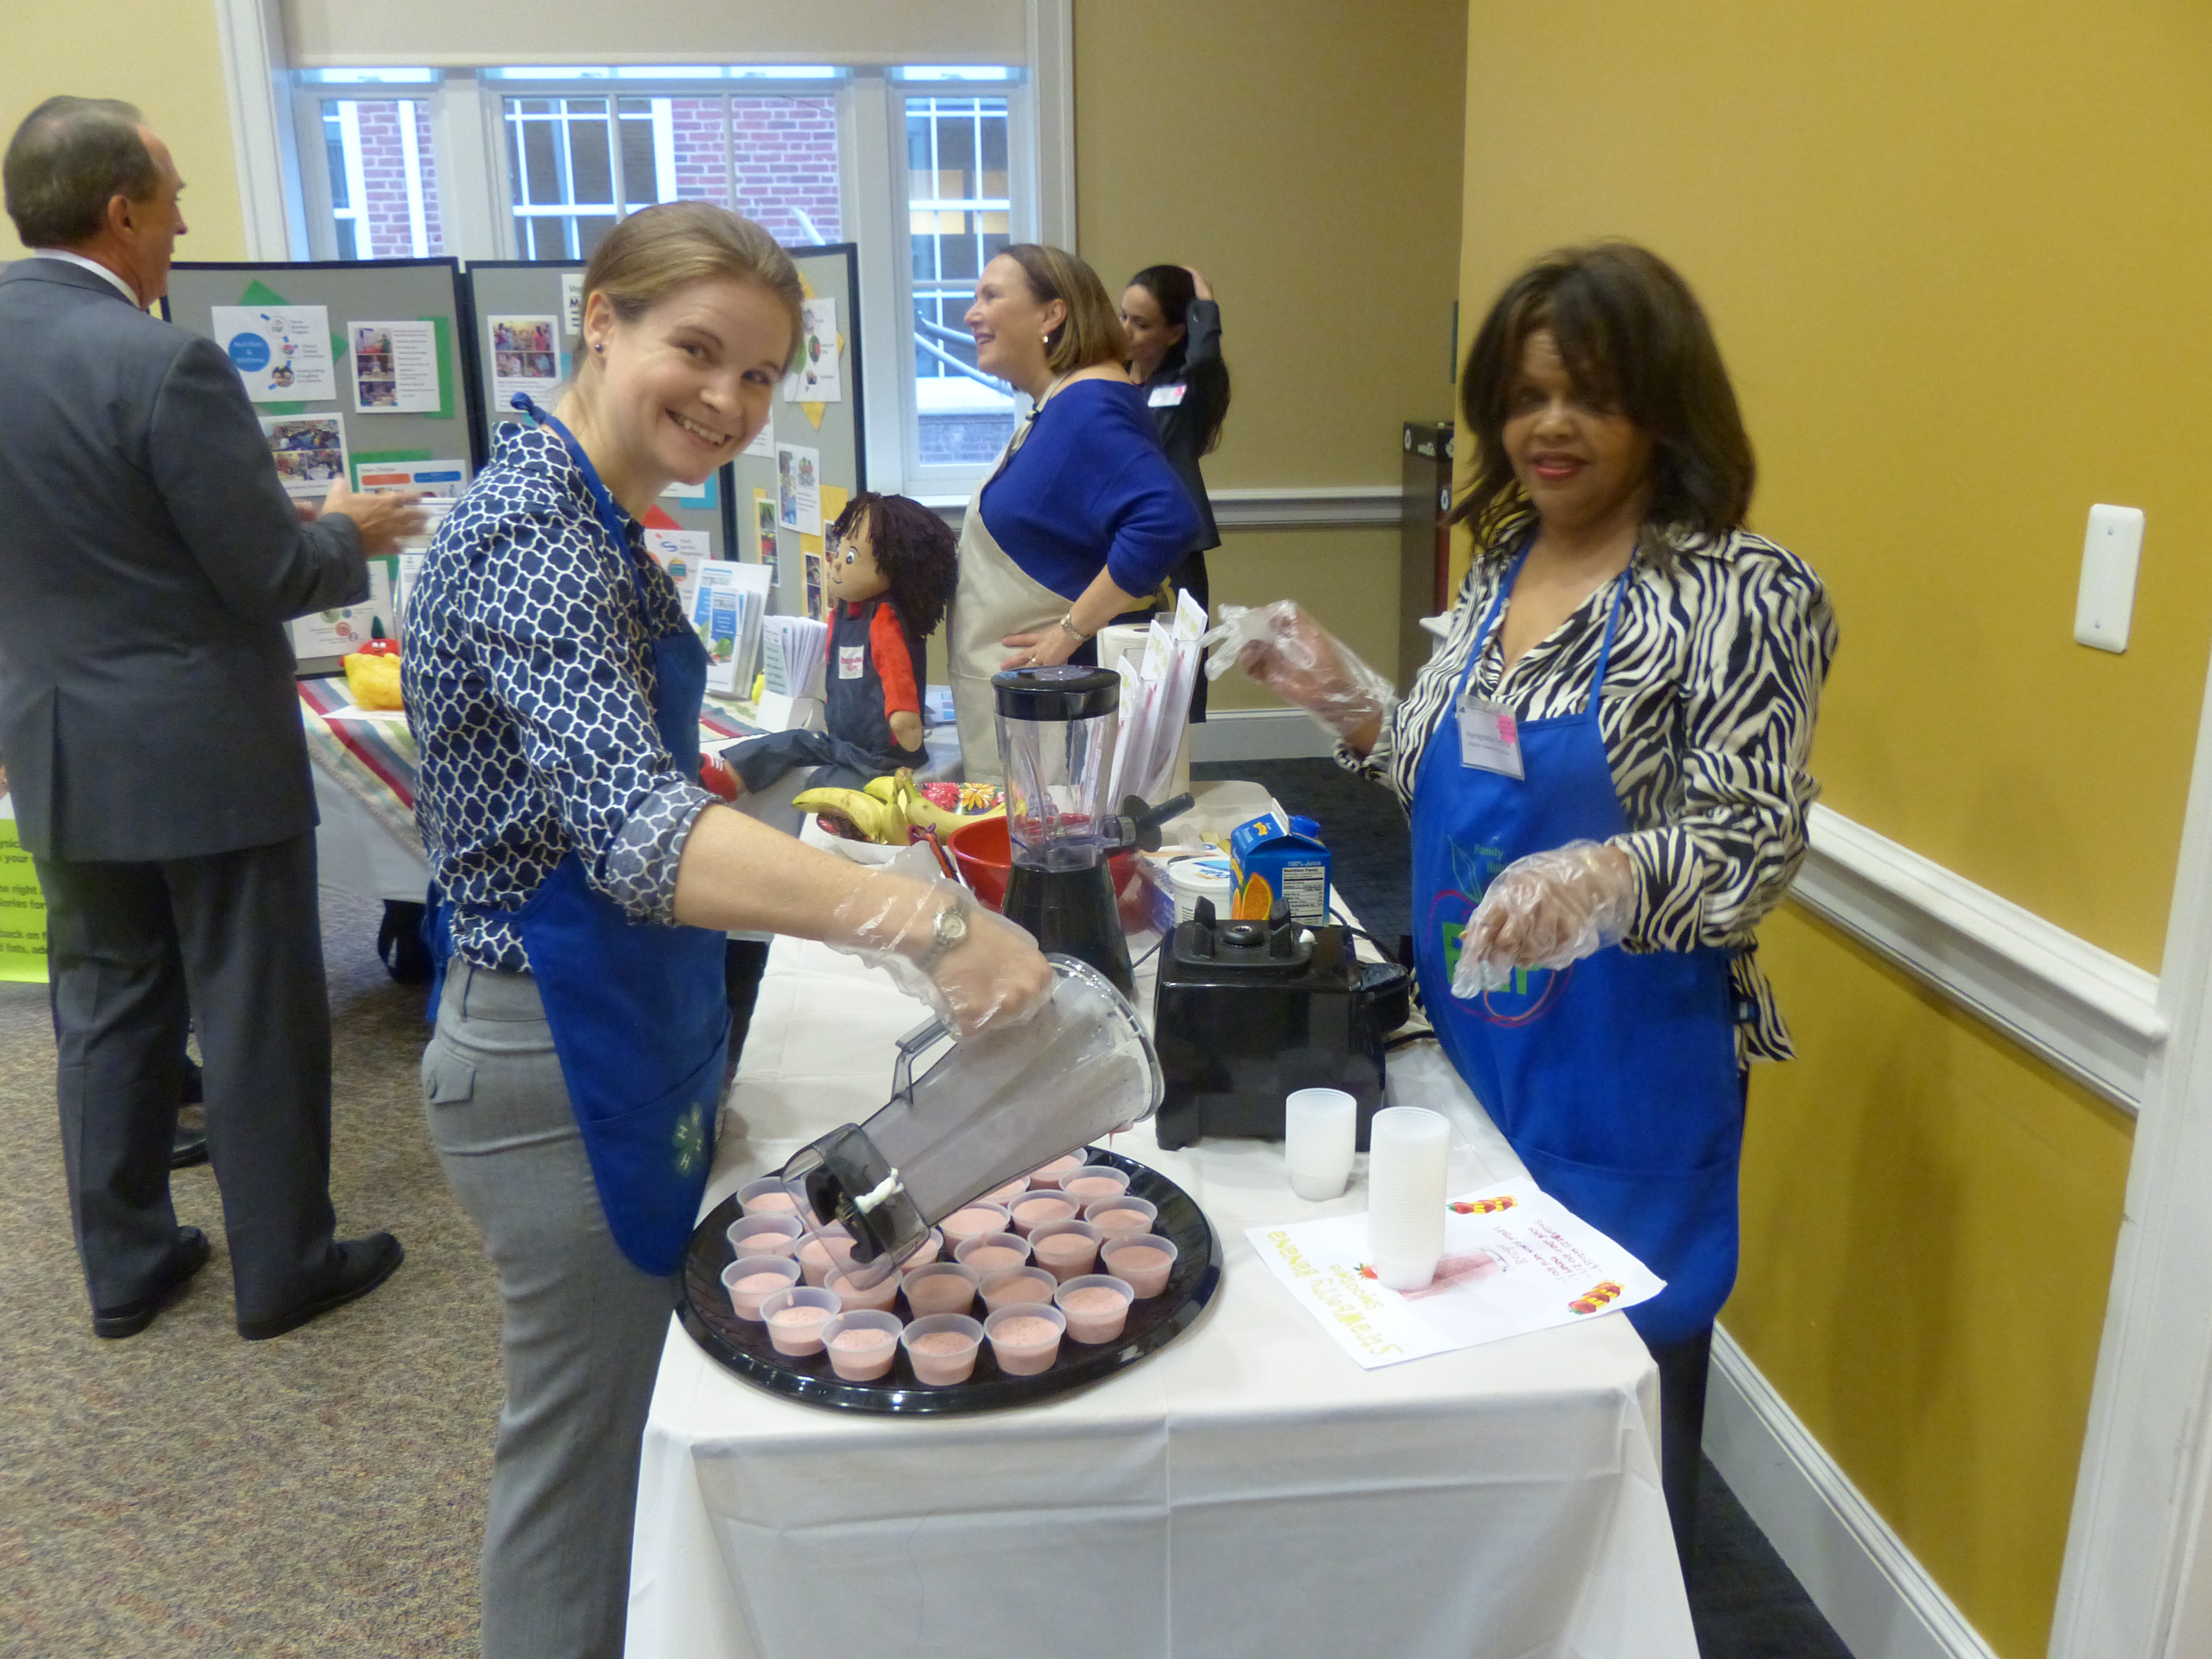 Staff Megan Mauer and Haregowoin Tecklu prepare healthy smoothies to share with visitors